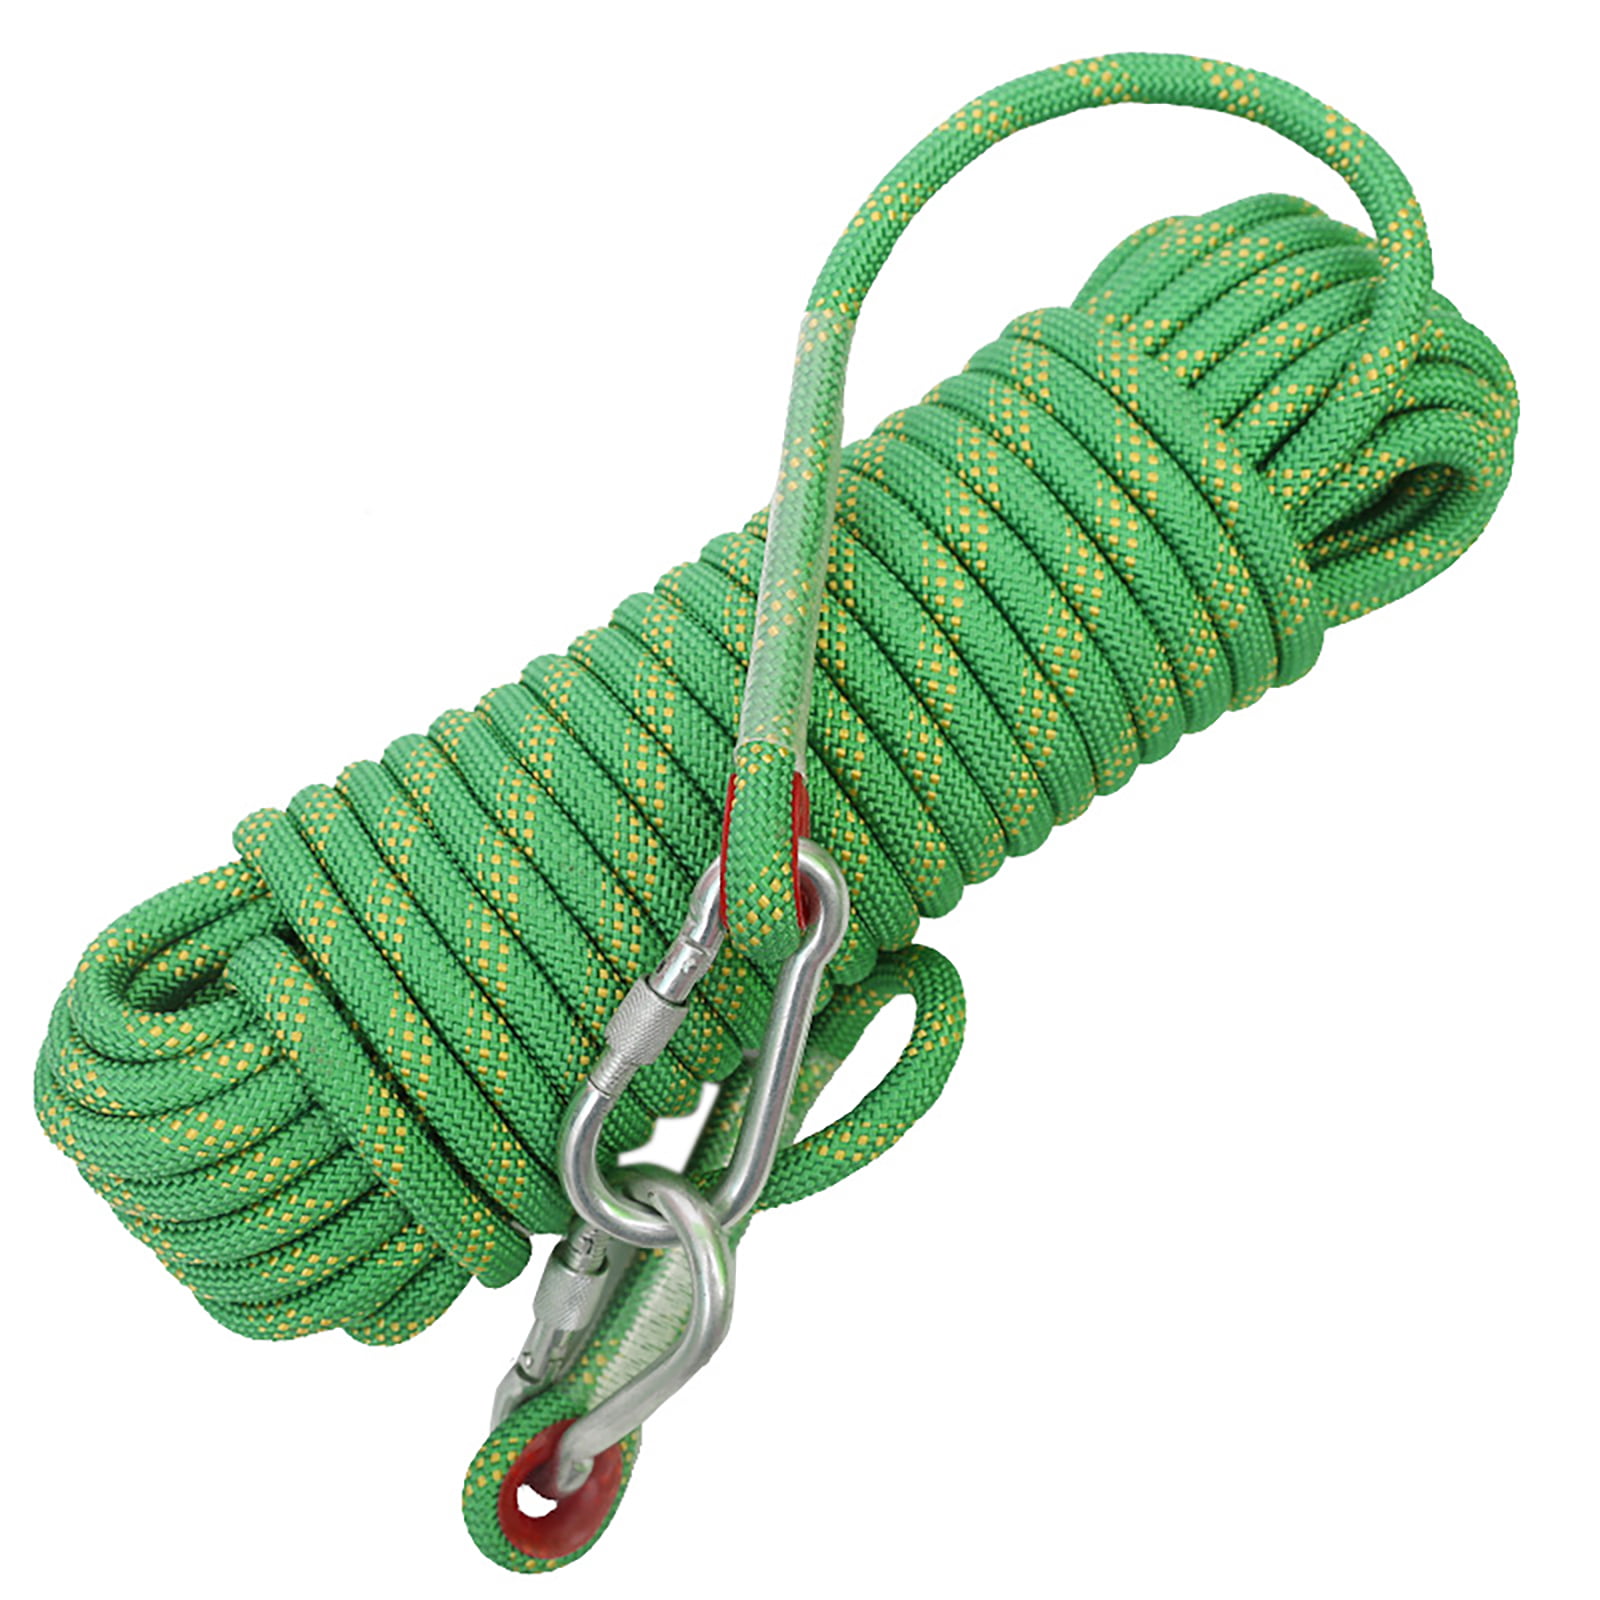 12MM Climbing Rope Gym Mountaineering Safety Rock Rappelling Cord w/Carabiner 